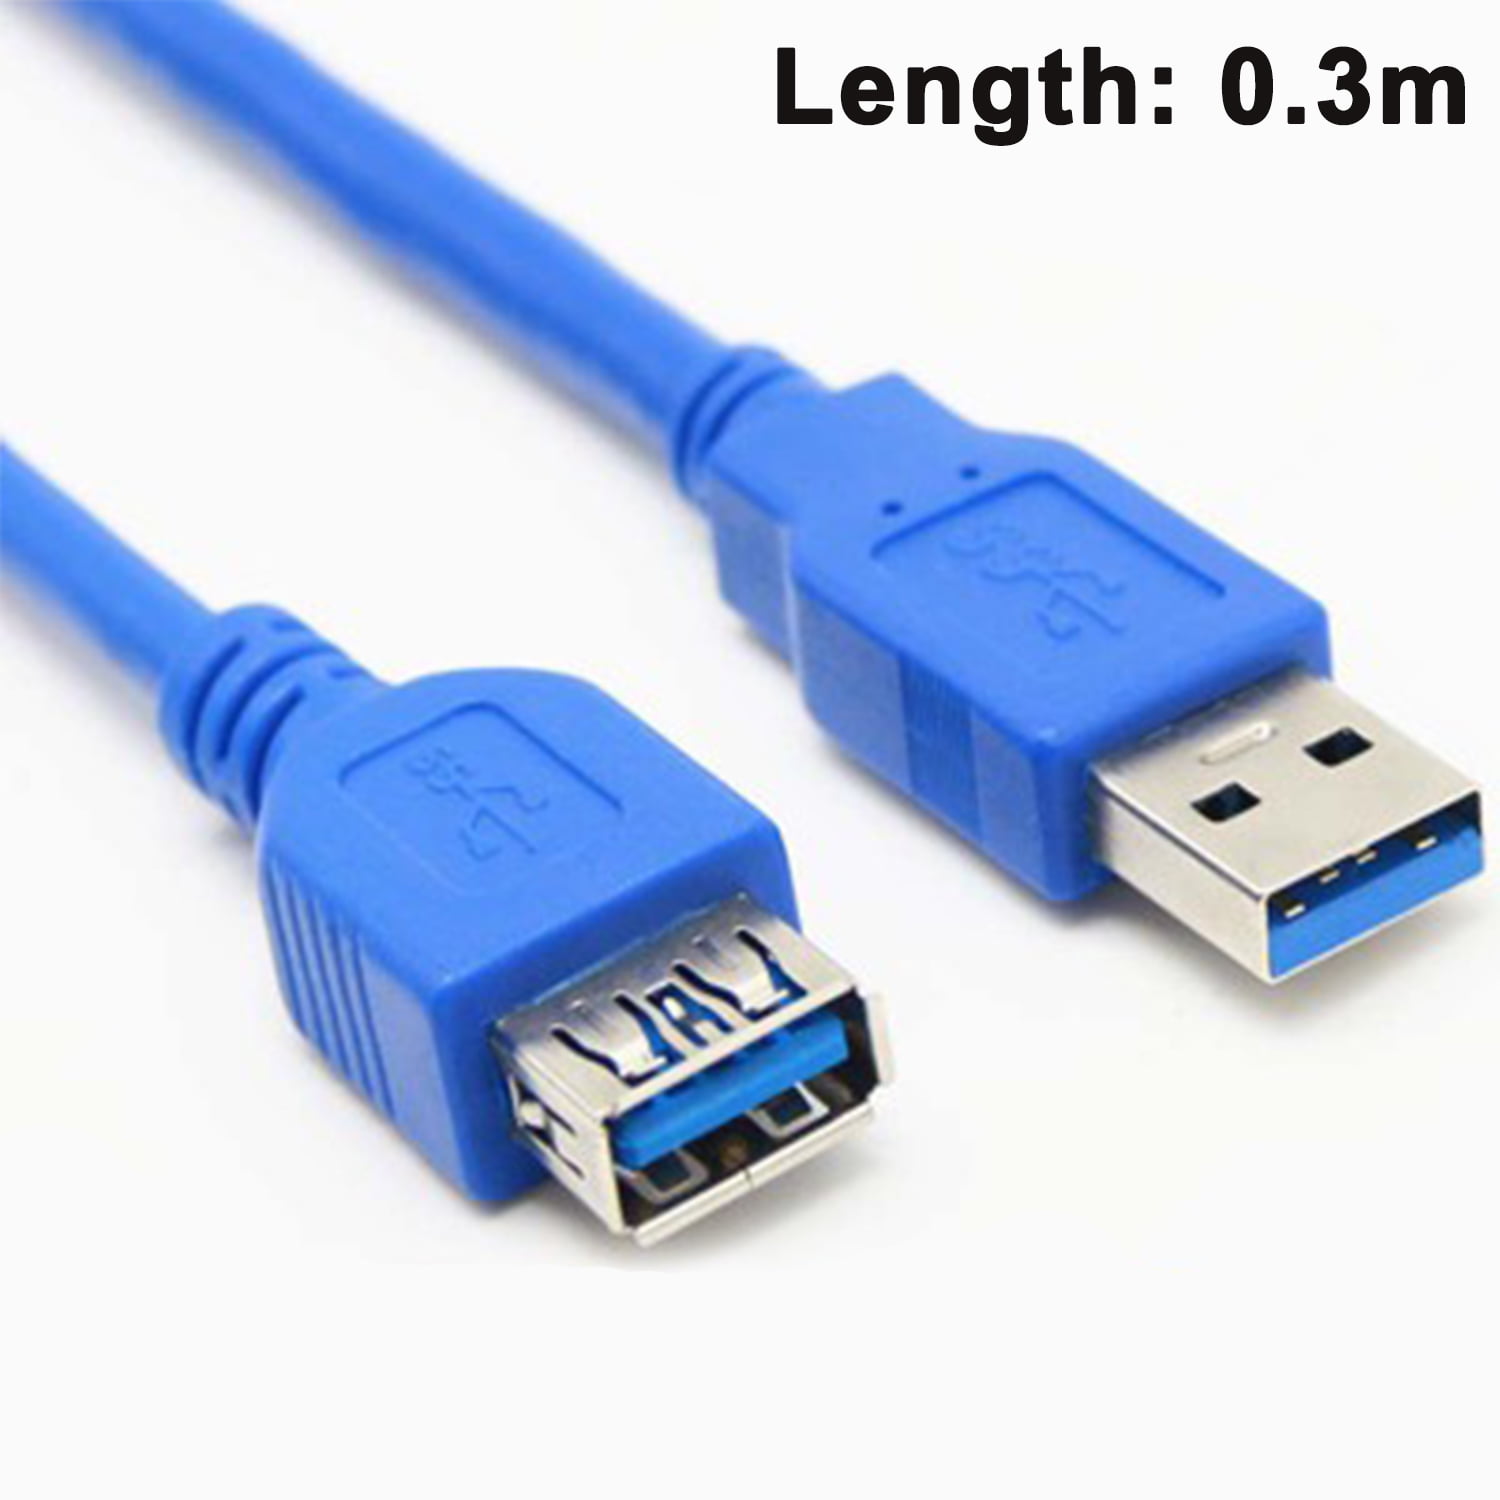 USB 2.0 to Micro USB Charging Cable Bundle Pack (3 x 0.3M)